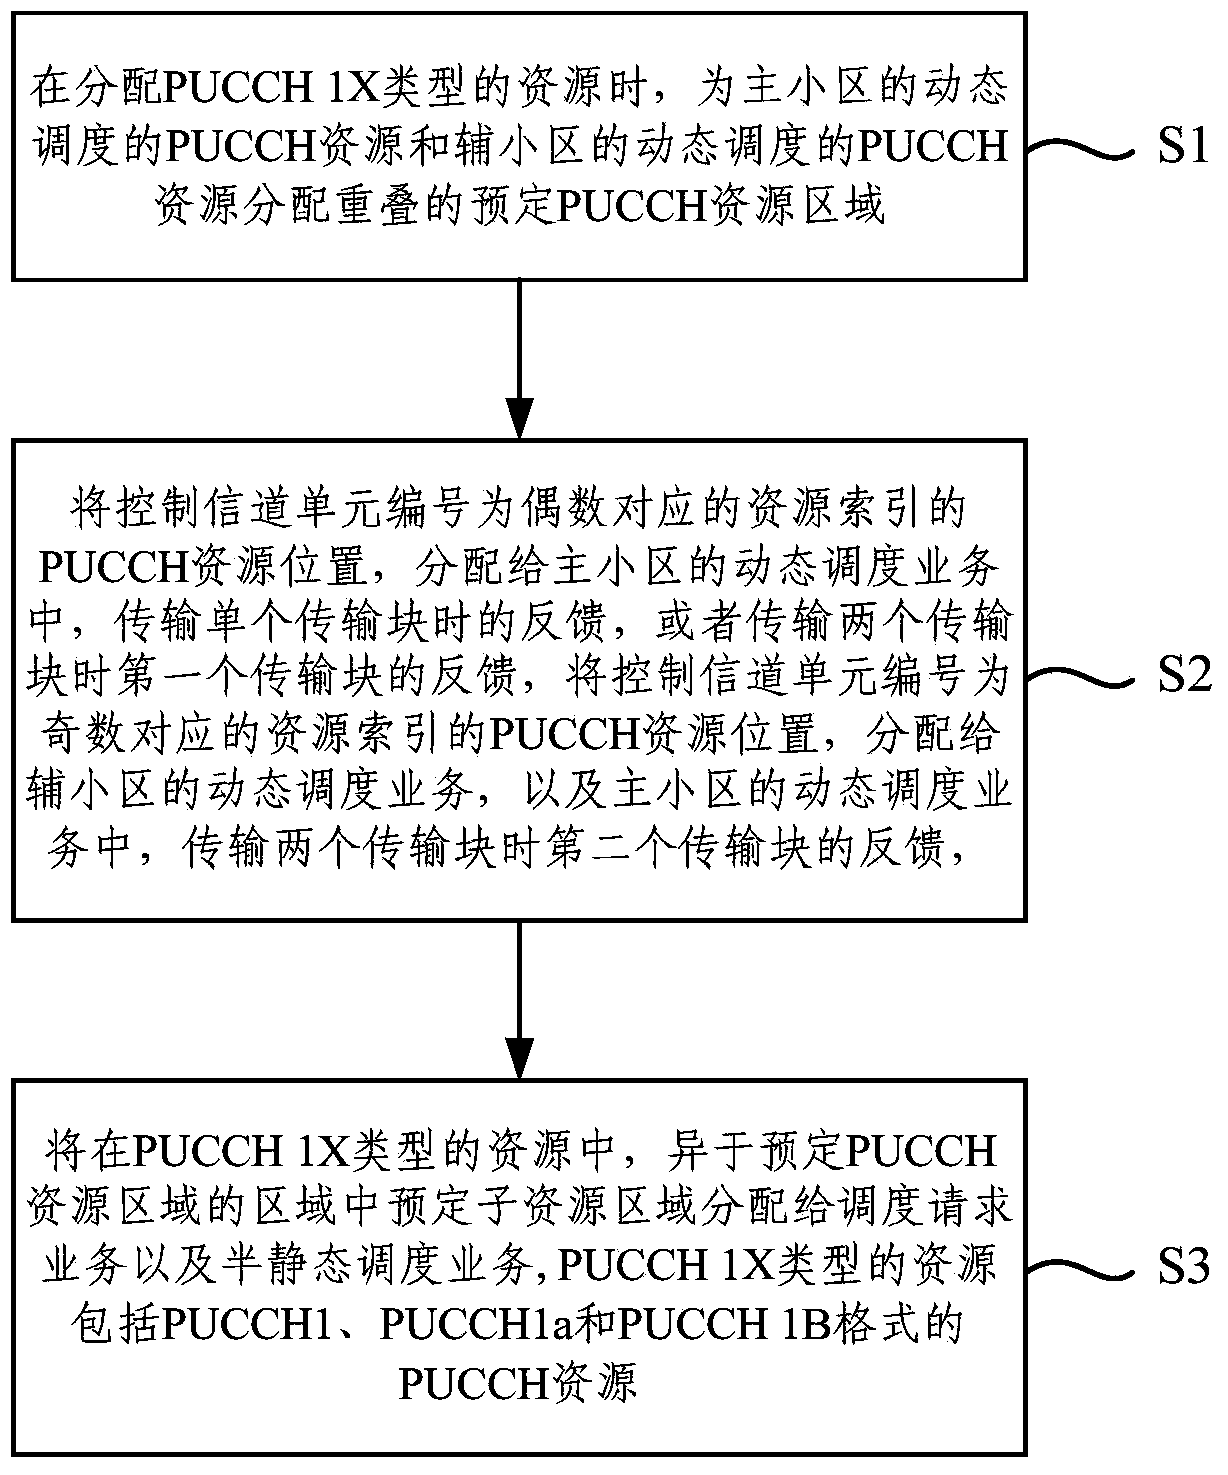 A PUCCH resource allocation method in LTE-A